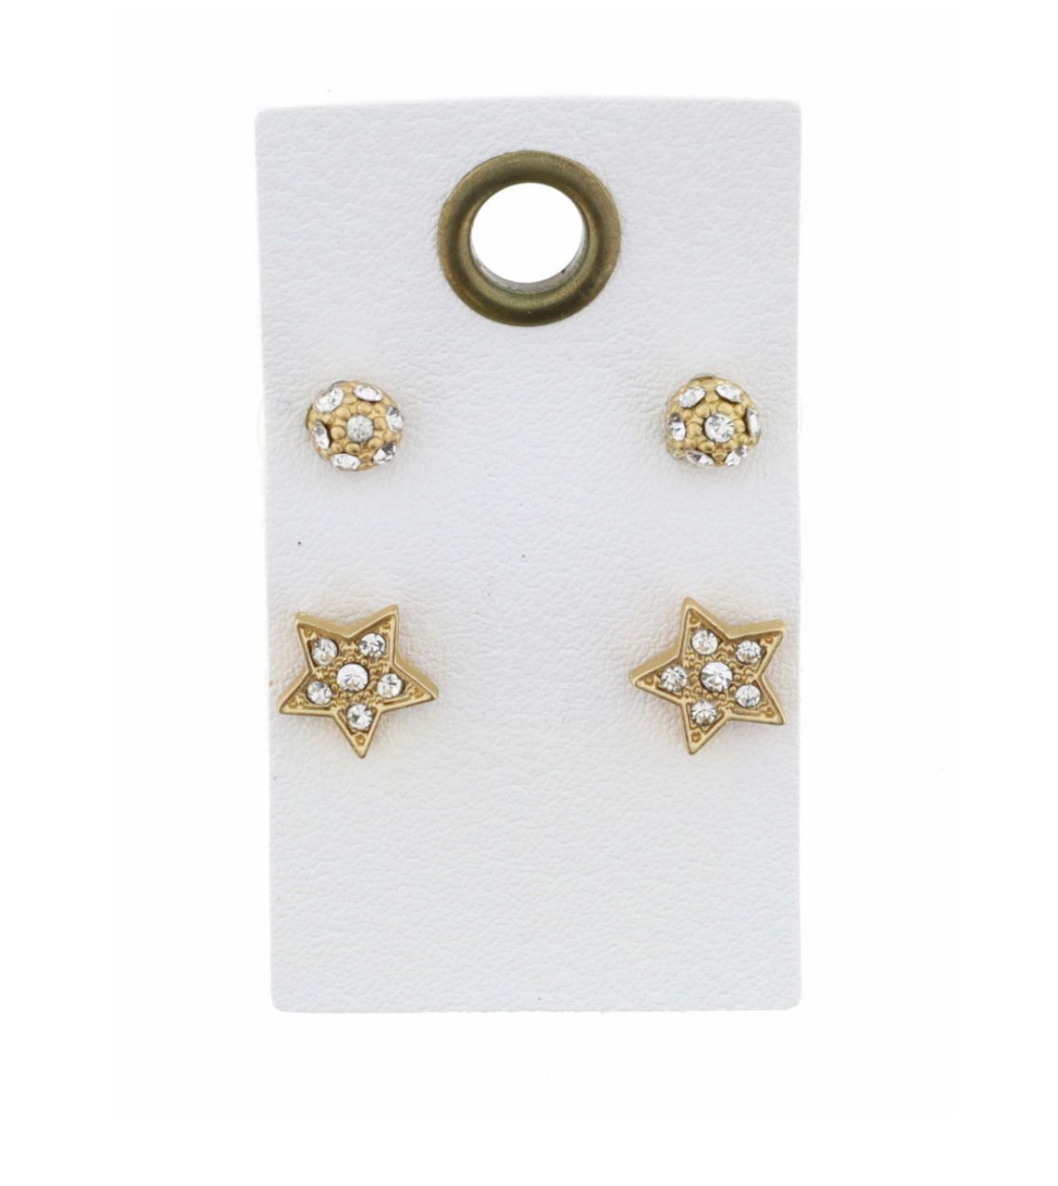 CLEAR CRYSTAL BALL STUD, GOLD STAR WITH CRYSTALS EARRING